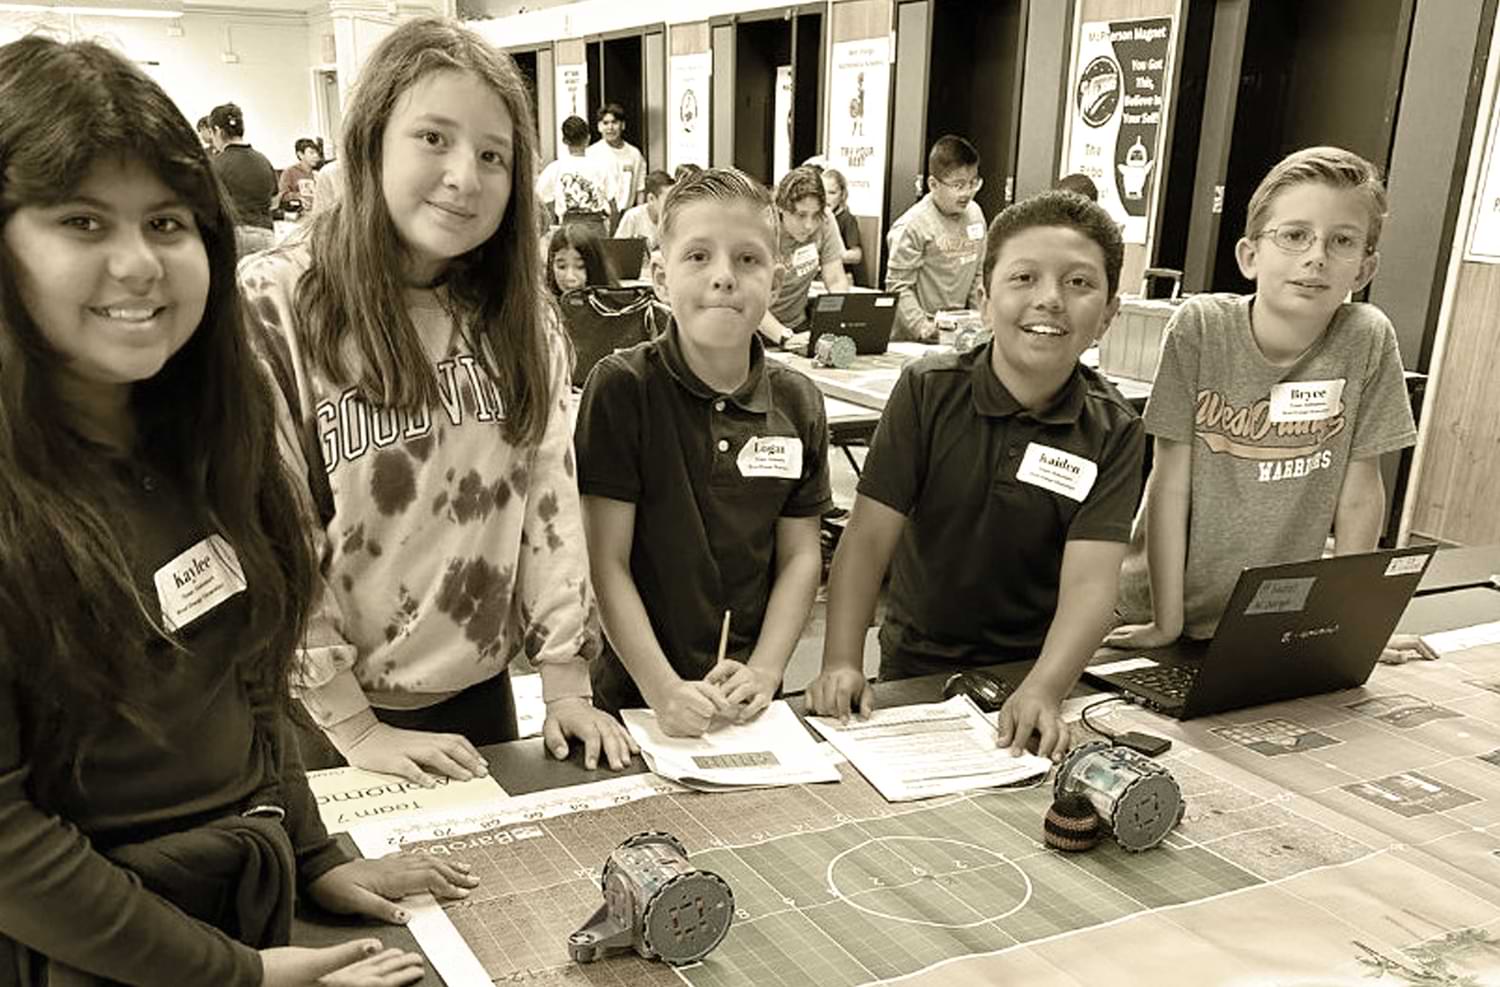 five elementary aged students from West Orange Mathematics Academy smile for a group photo at a STEM event team table